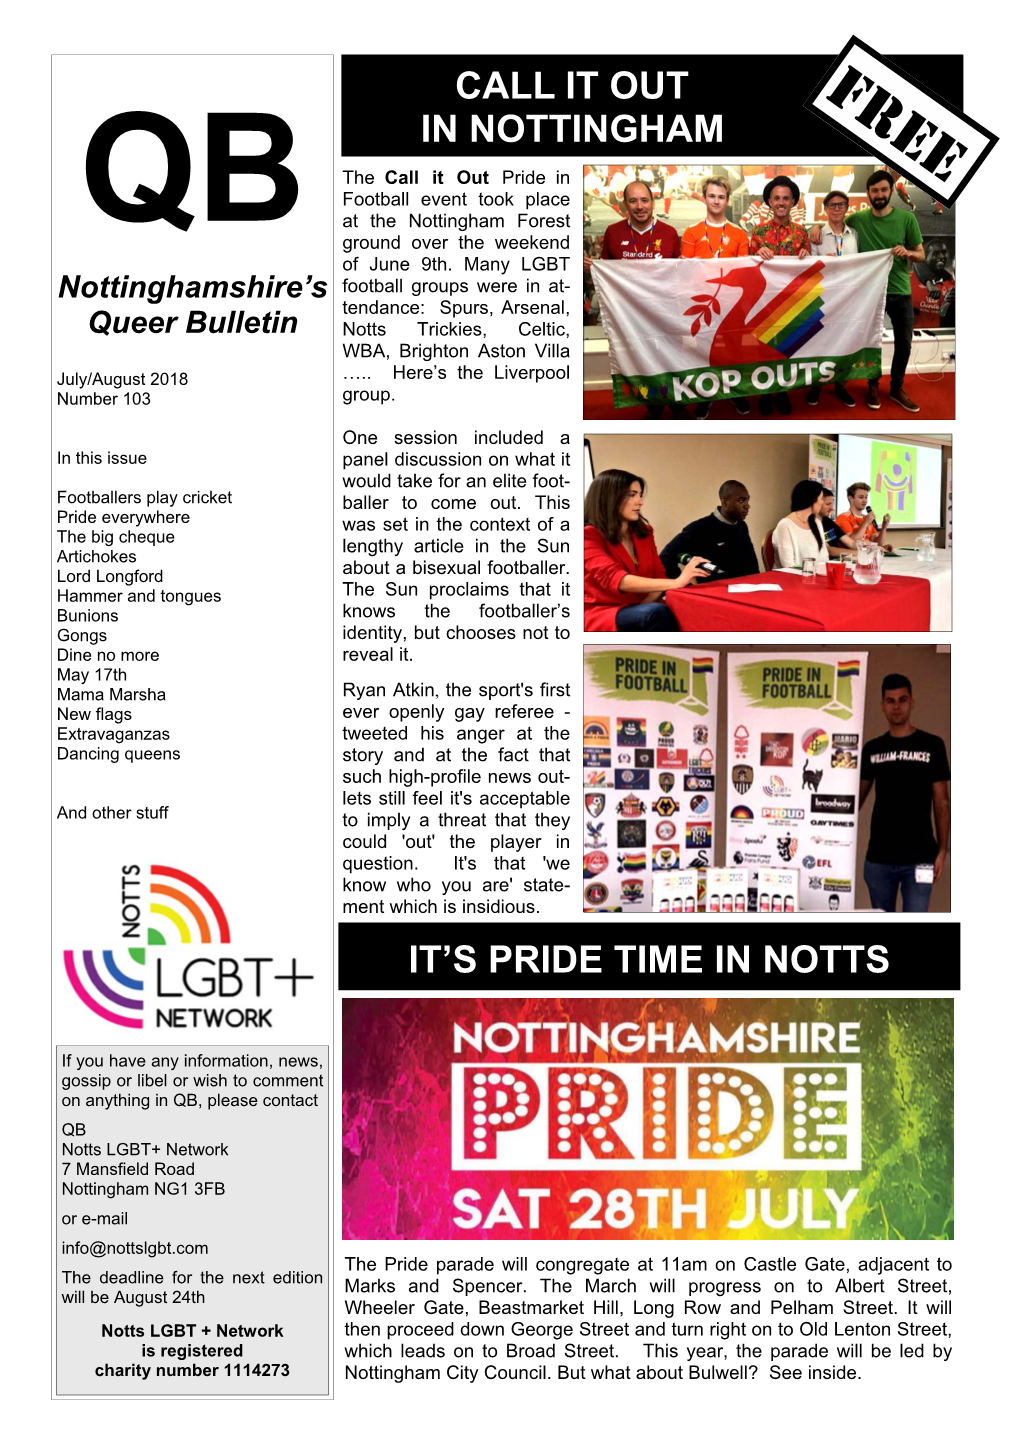 Call It out in Nottingham It's Pride Time in Notts